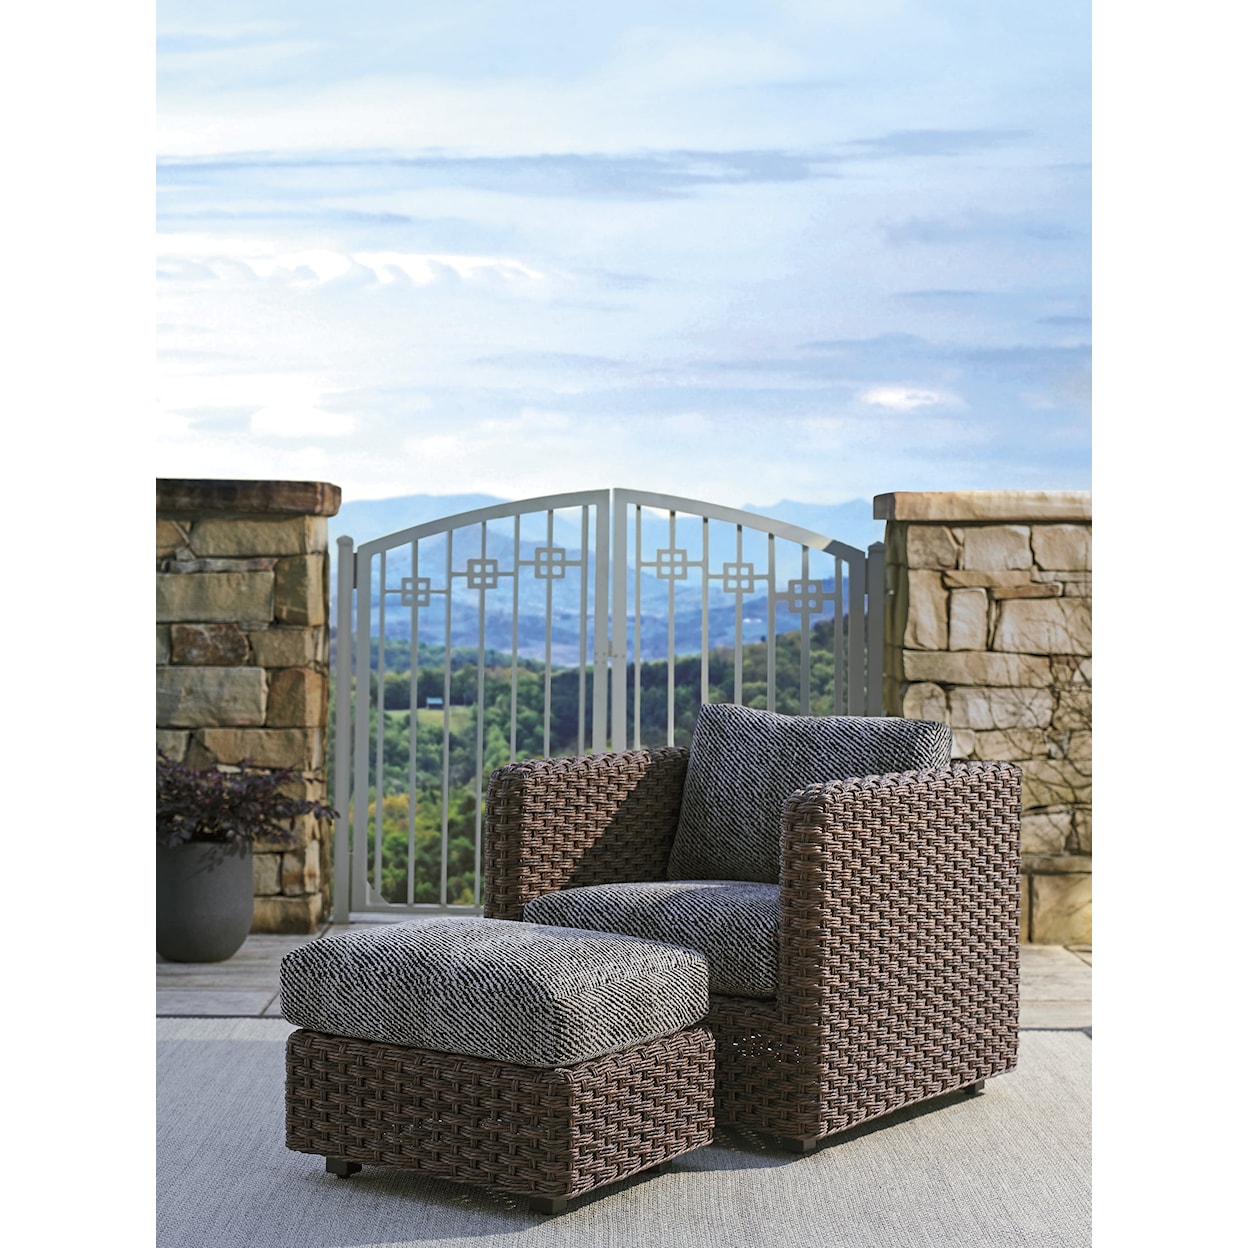 Tommy Bahama Outdoor Living Kilimanjaro Outdoor Lounge Chair